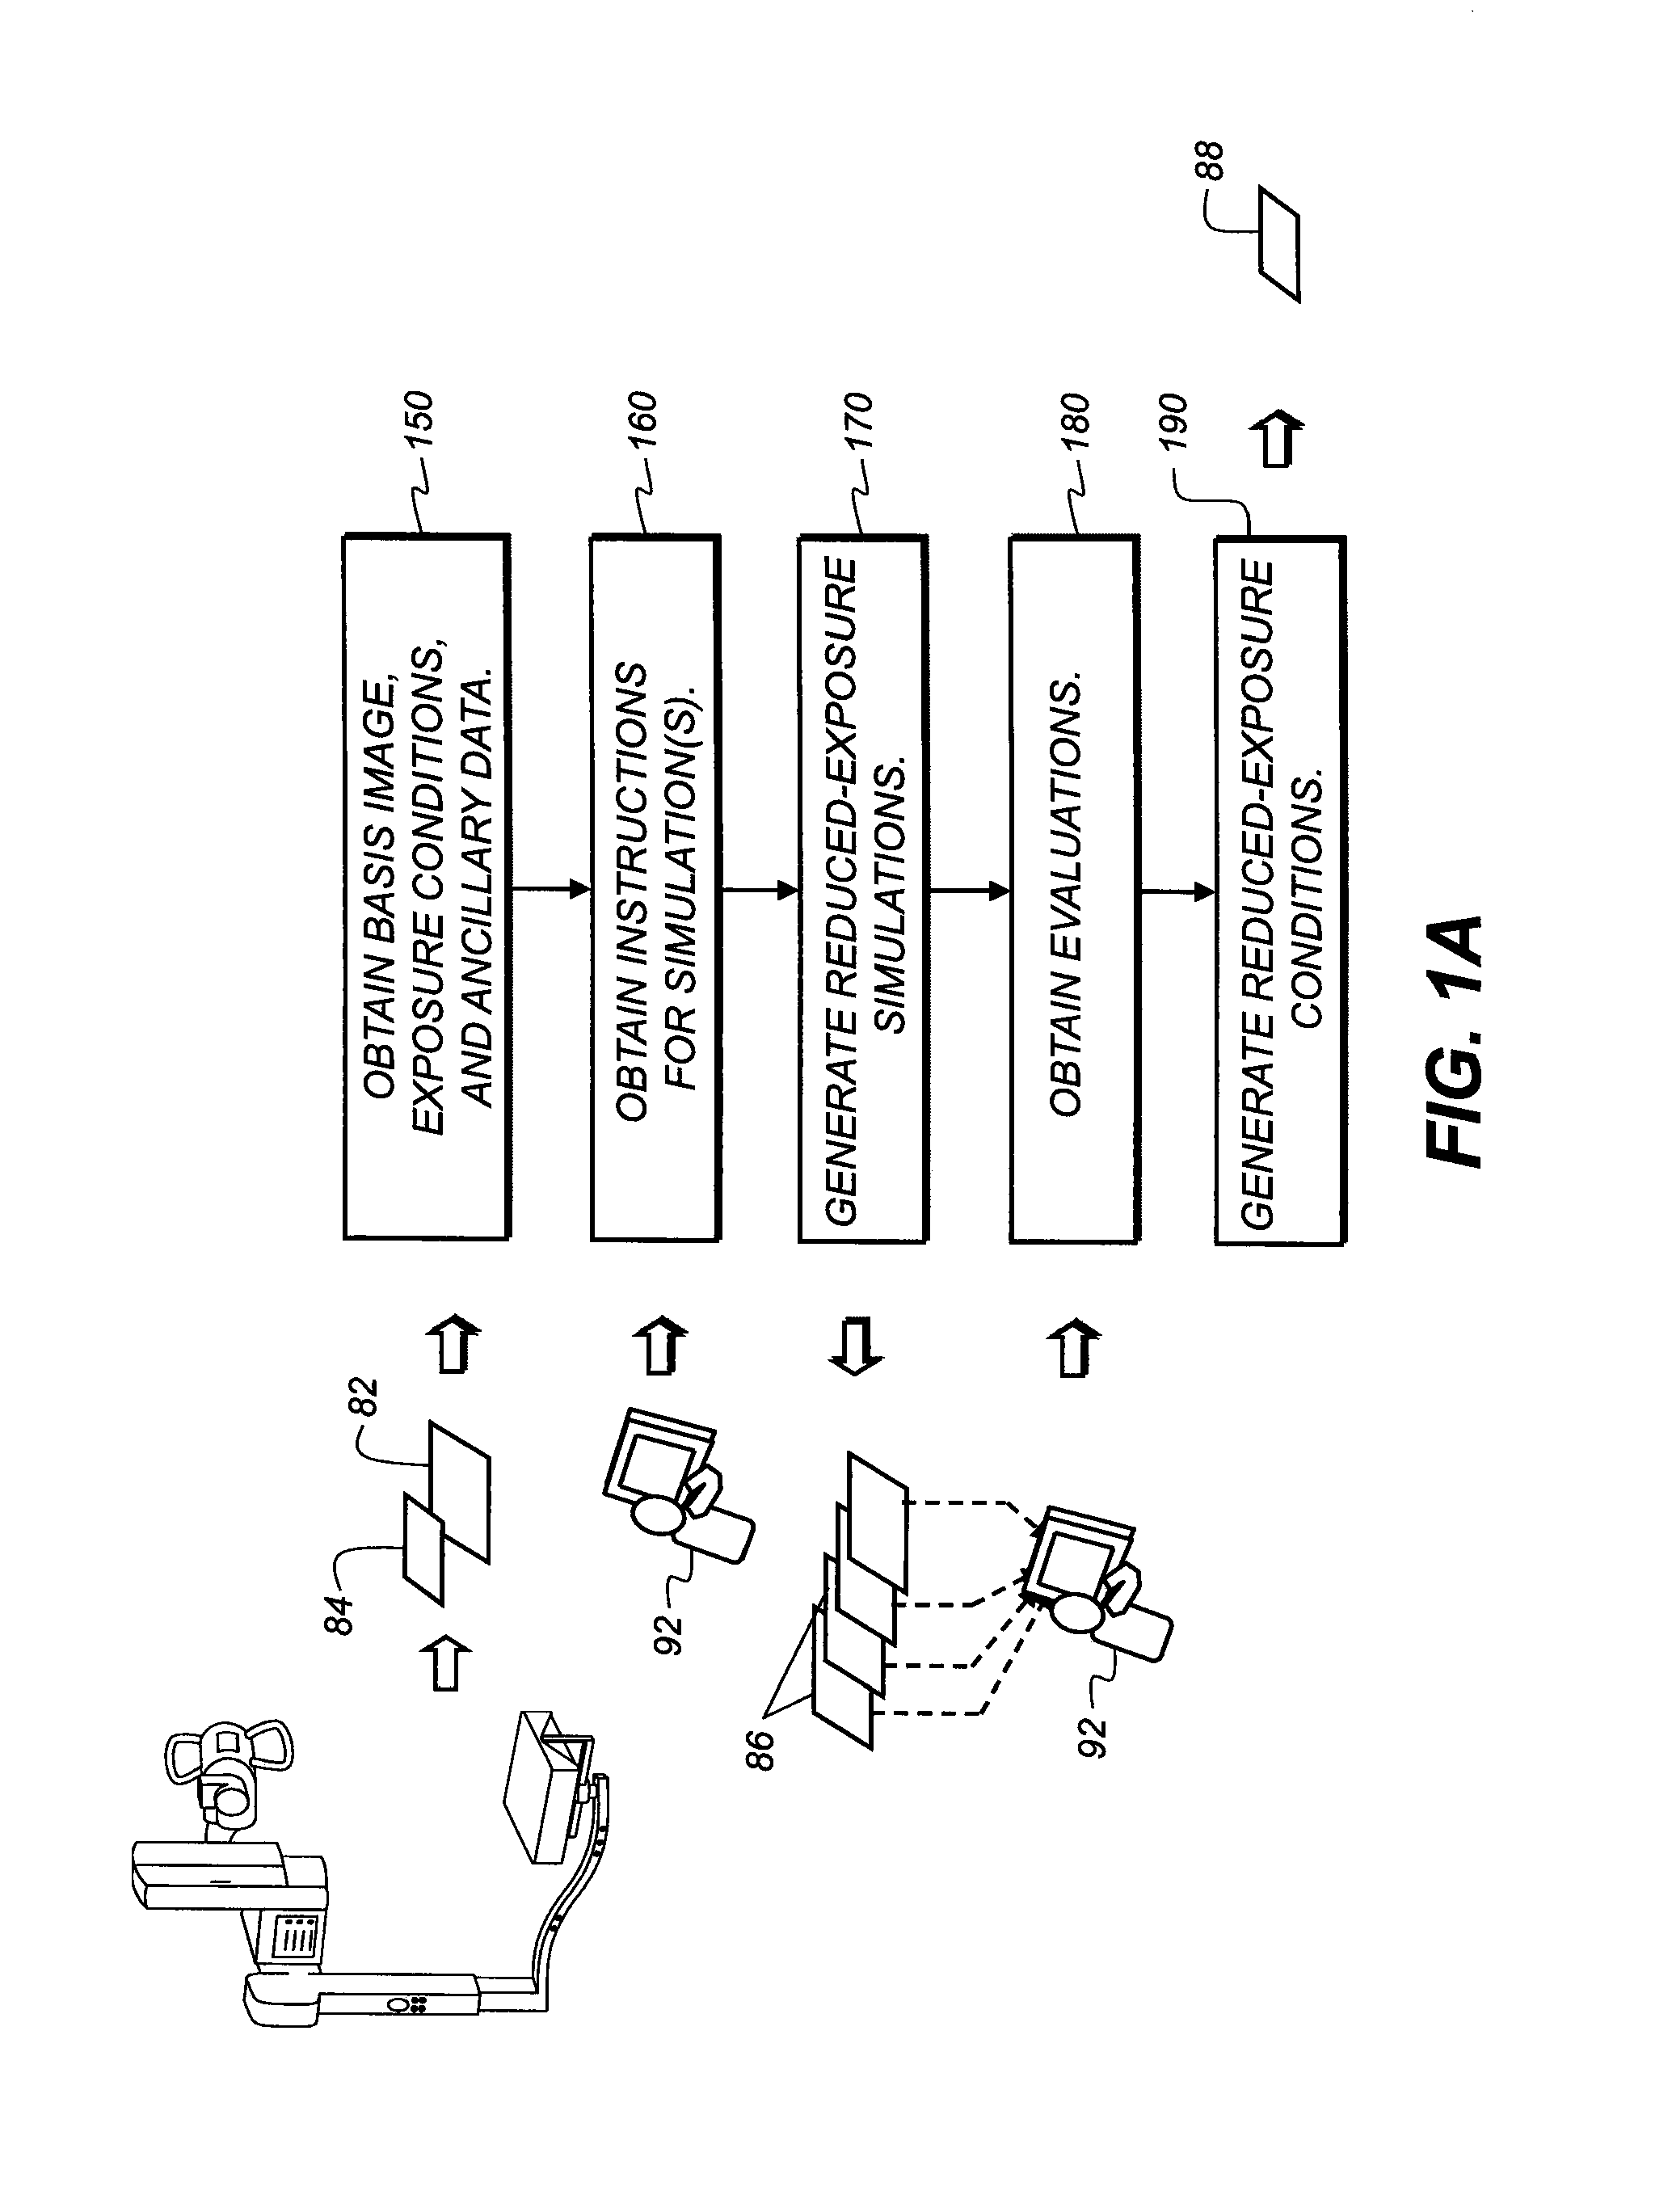 Dose-reduction decision system for medical images